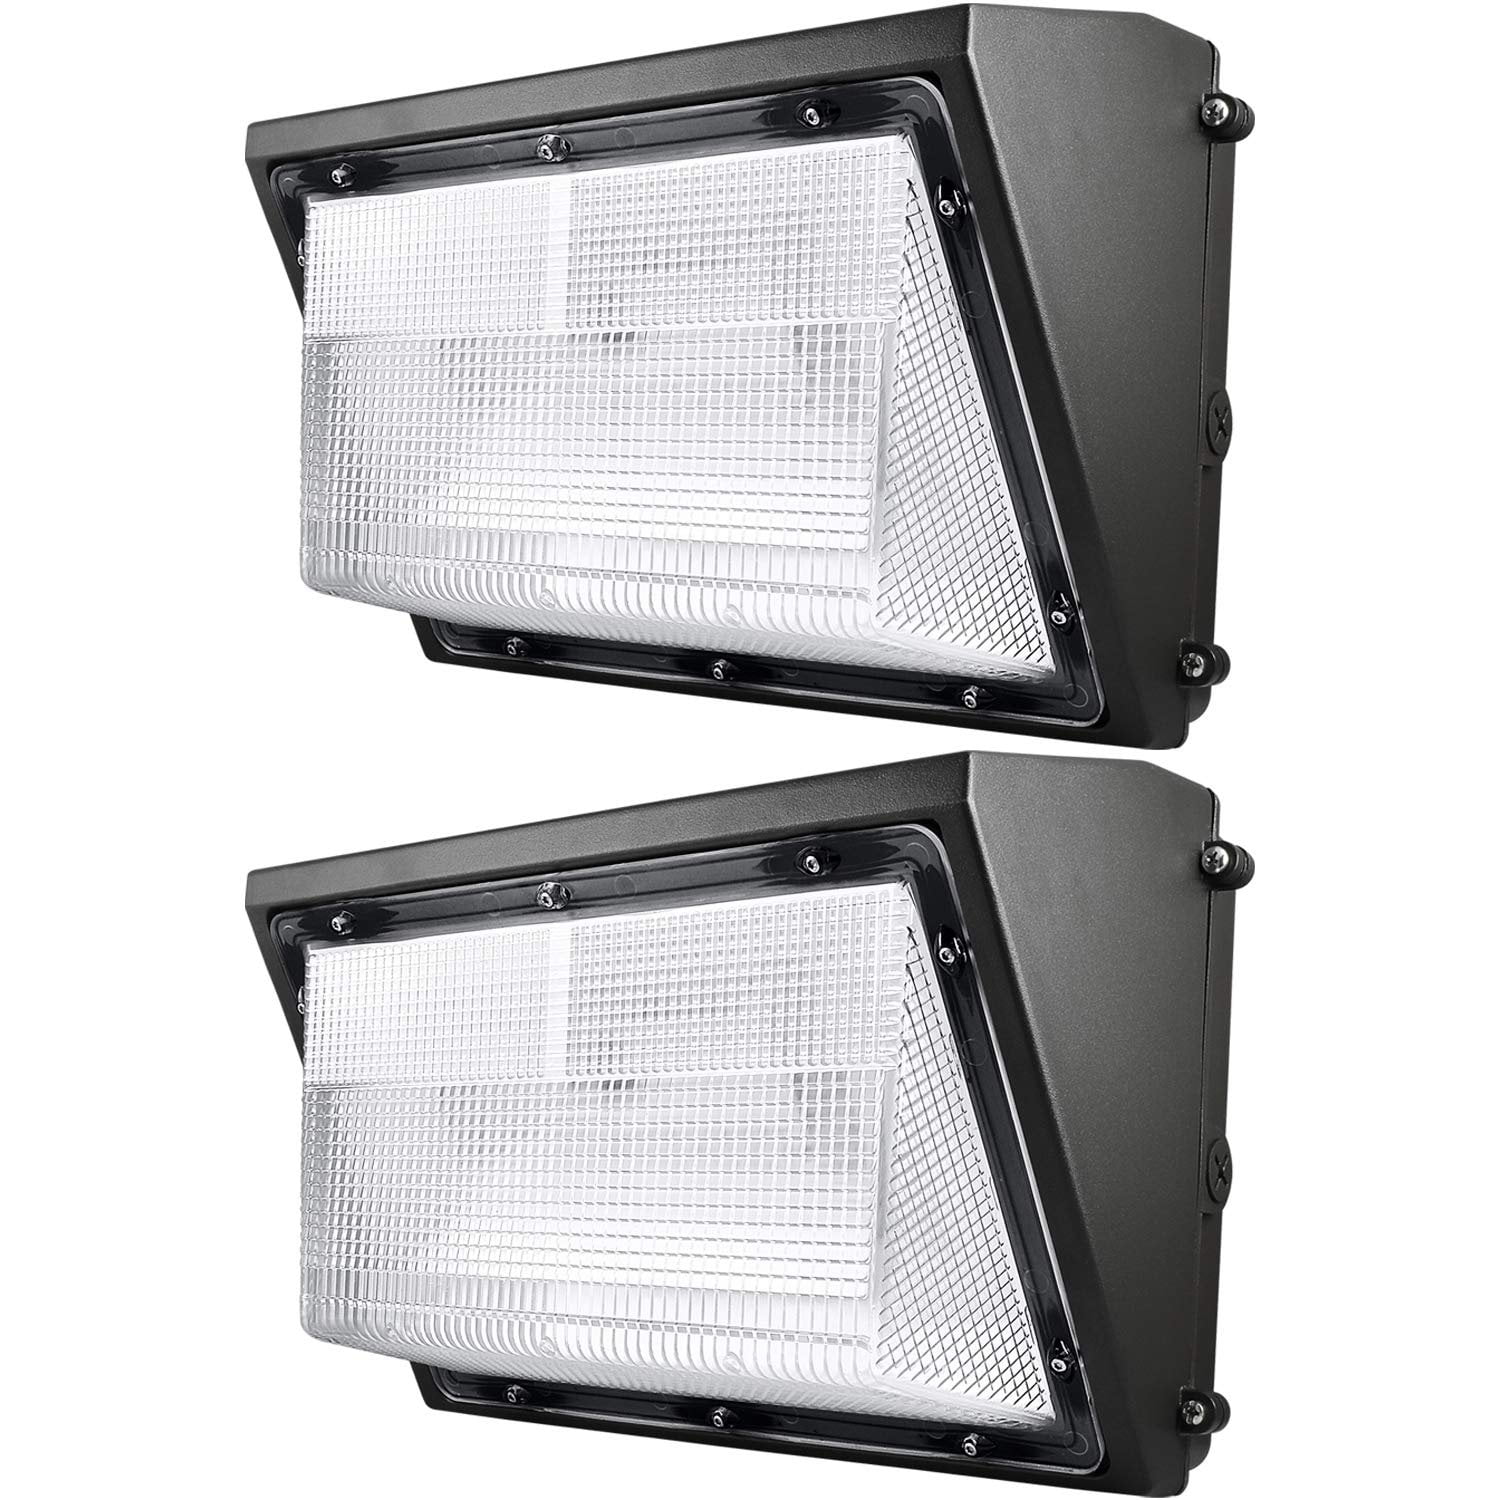 Luxrite Dusk to Dawn LED Wall Pack 60W 5000K, 7085 Lumens, Commercial Outdoor Security Light